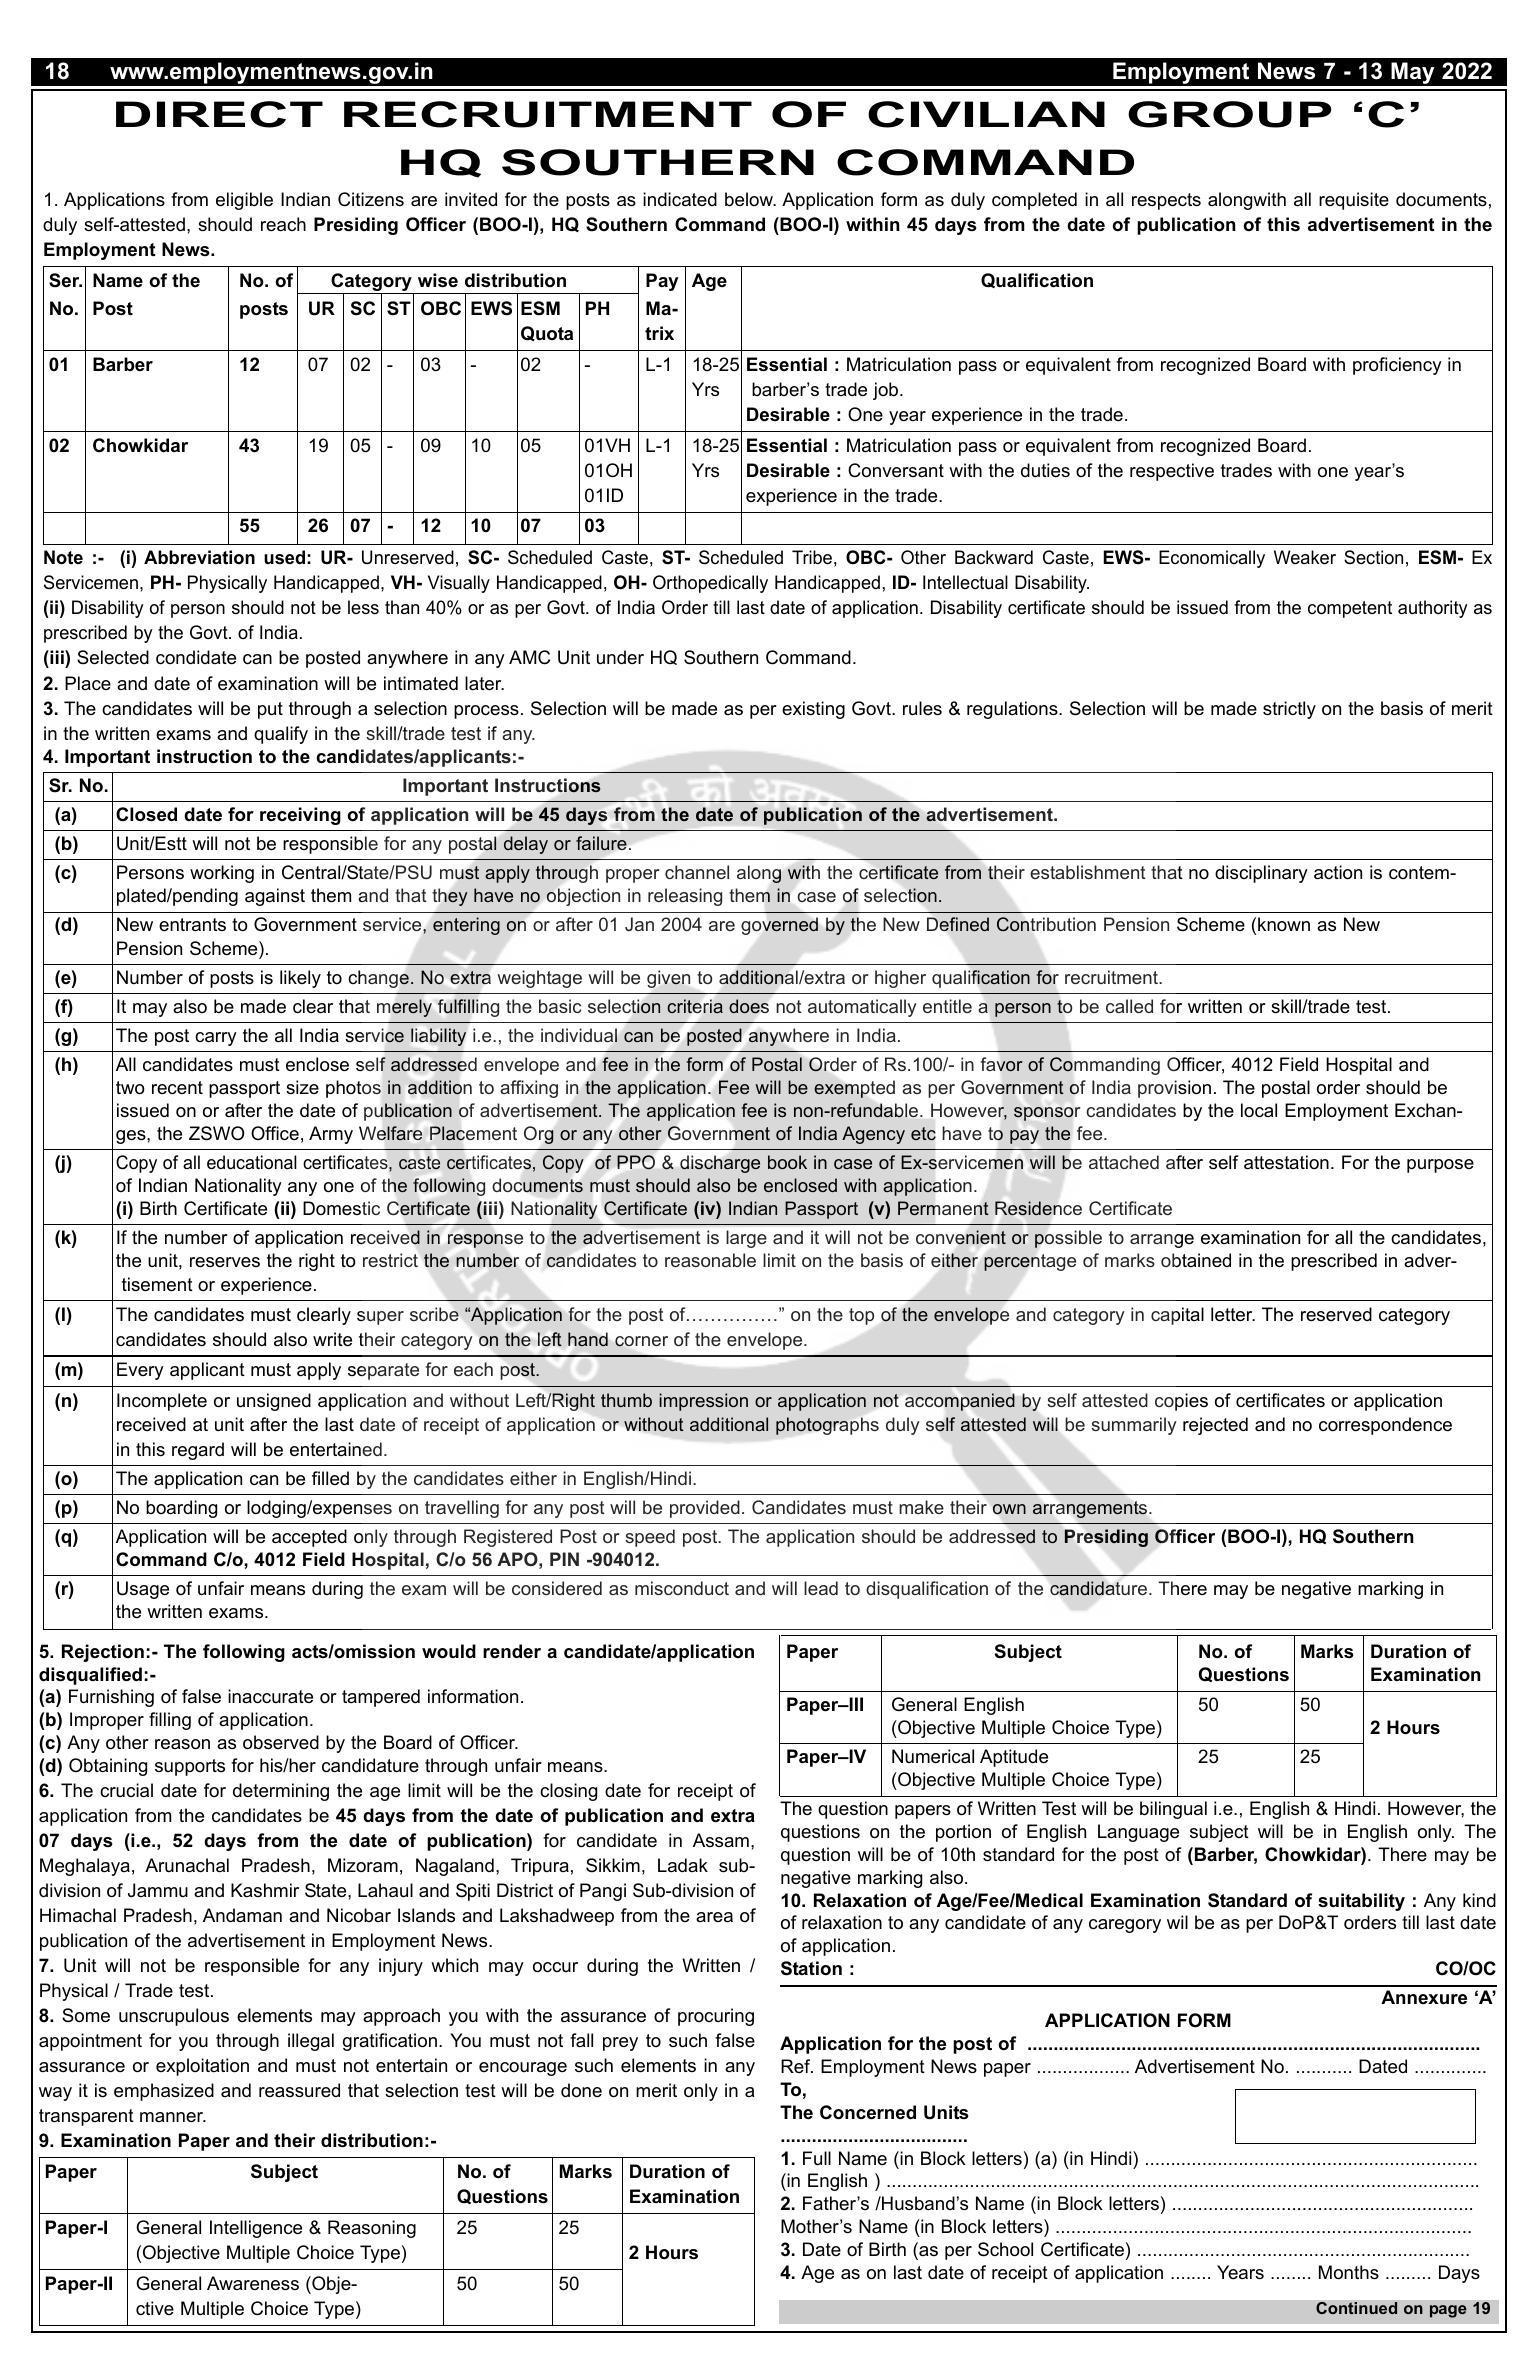 HQ Southern Command Recruitment 2022 For 55 Barber, Chowkidar - Page 1